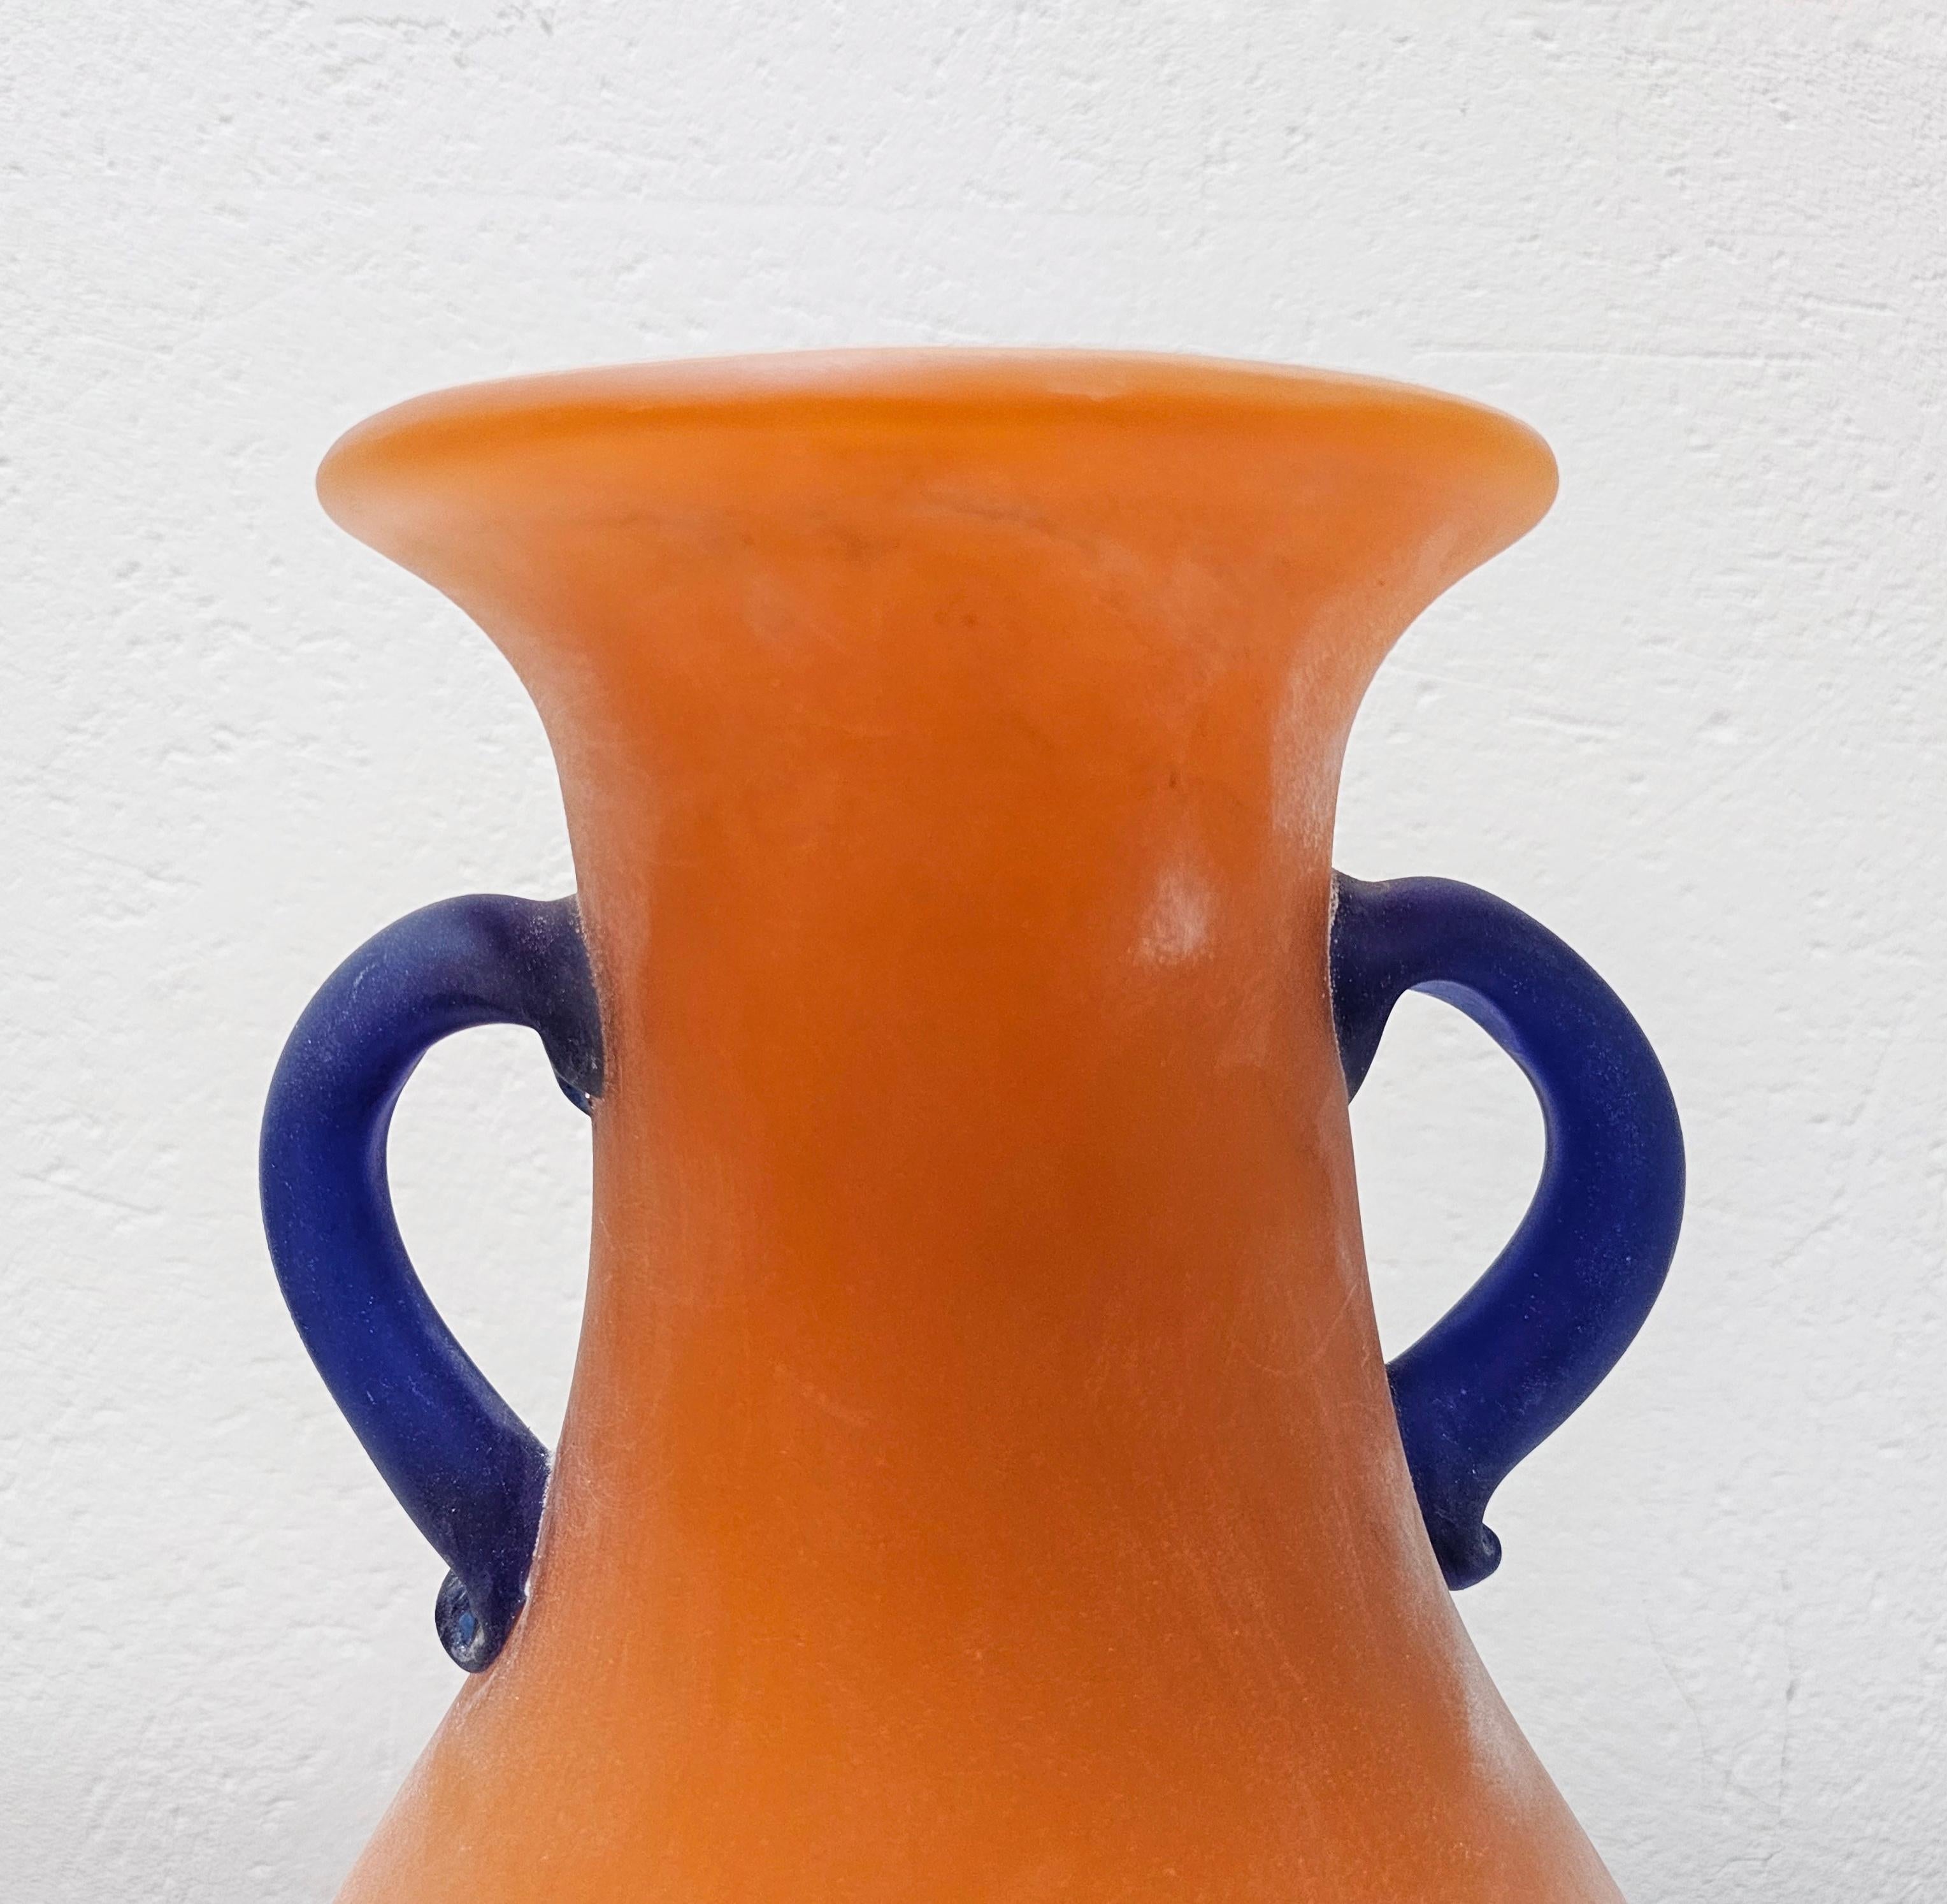 Italian Orange Murano Glass Scavo Vase By Carlo Moretti, Signed by author, Italy 1970s For Sale